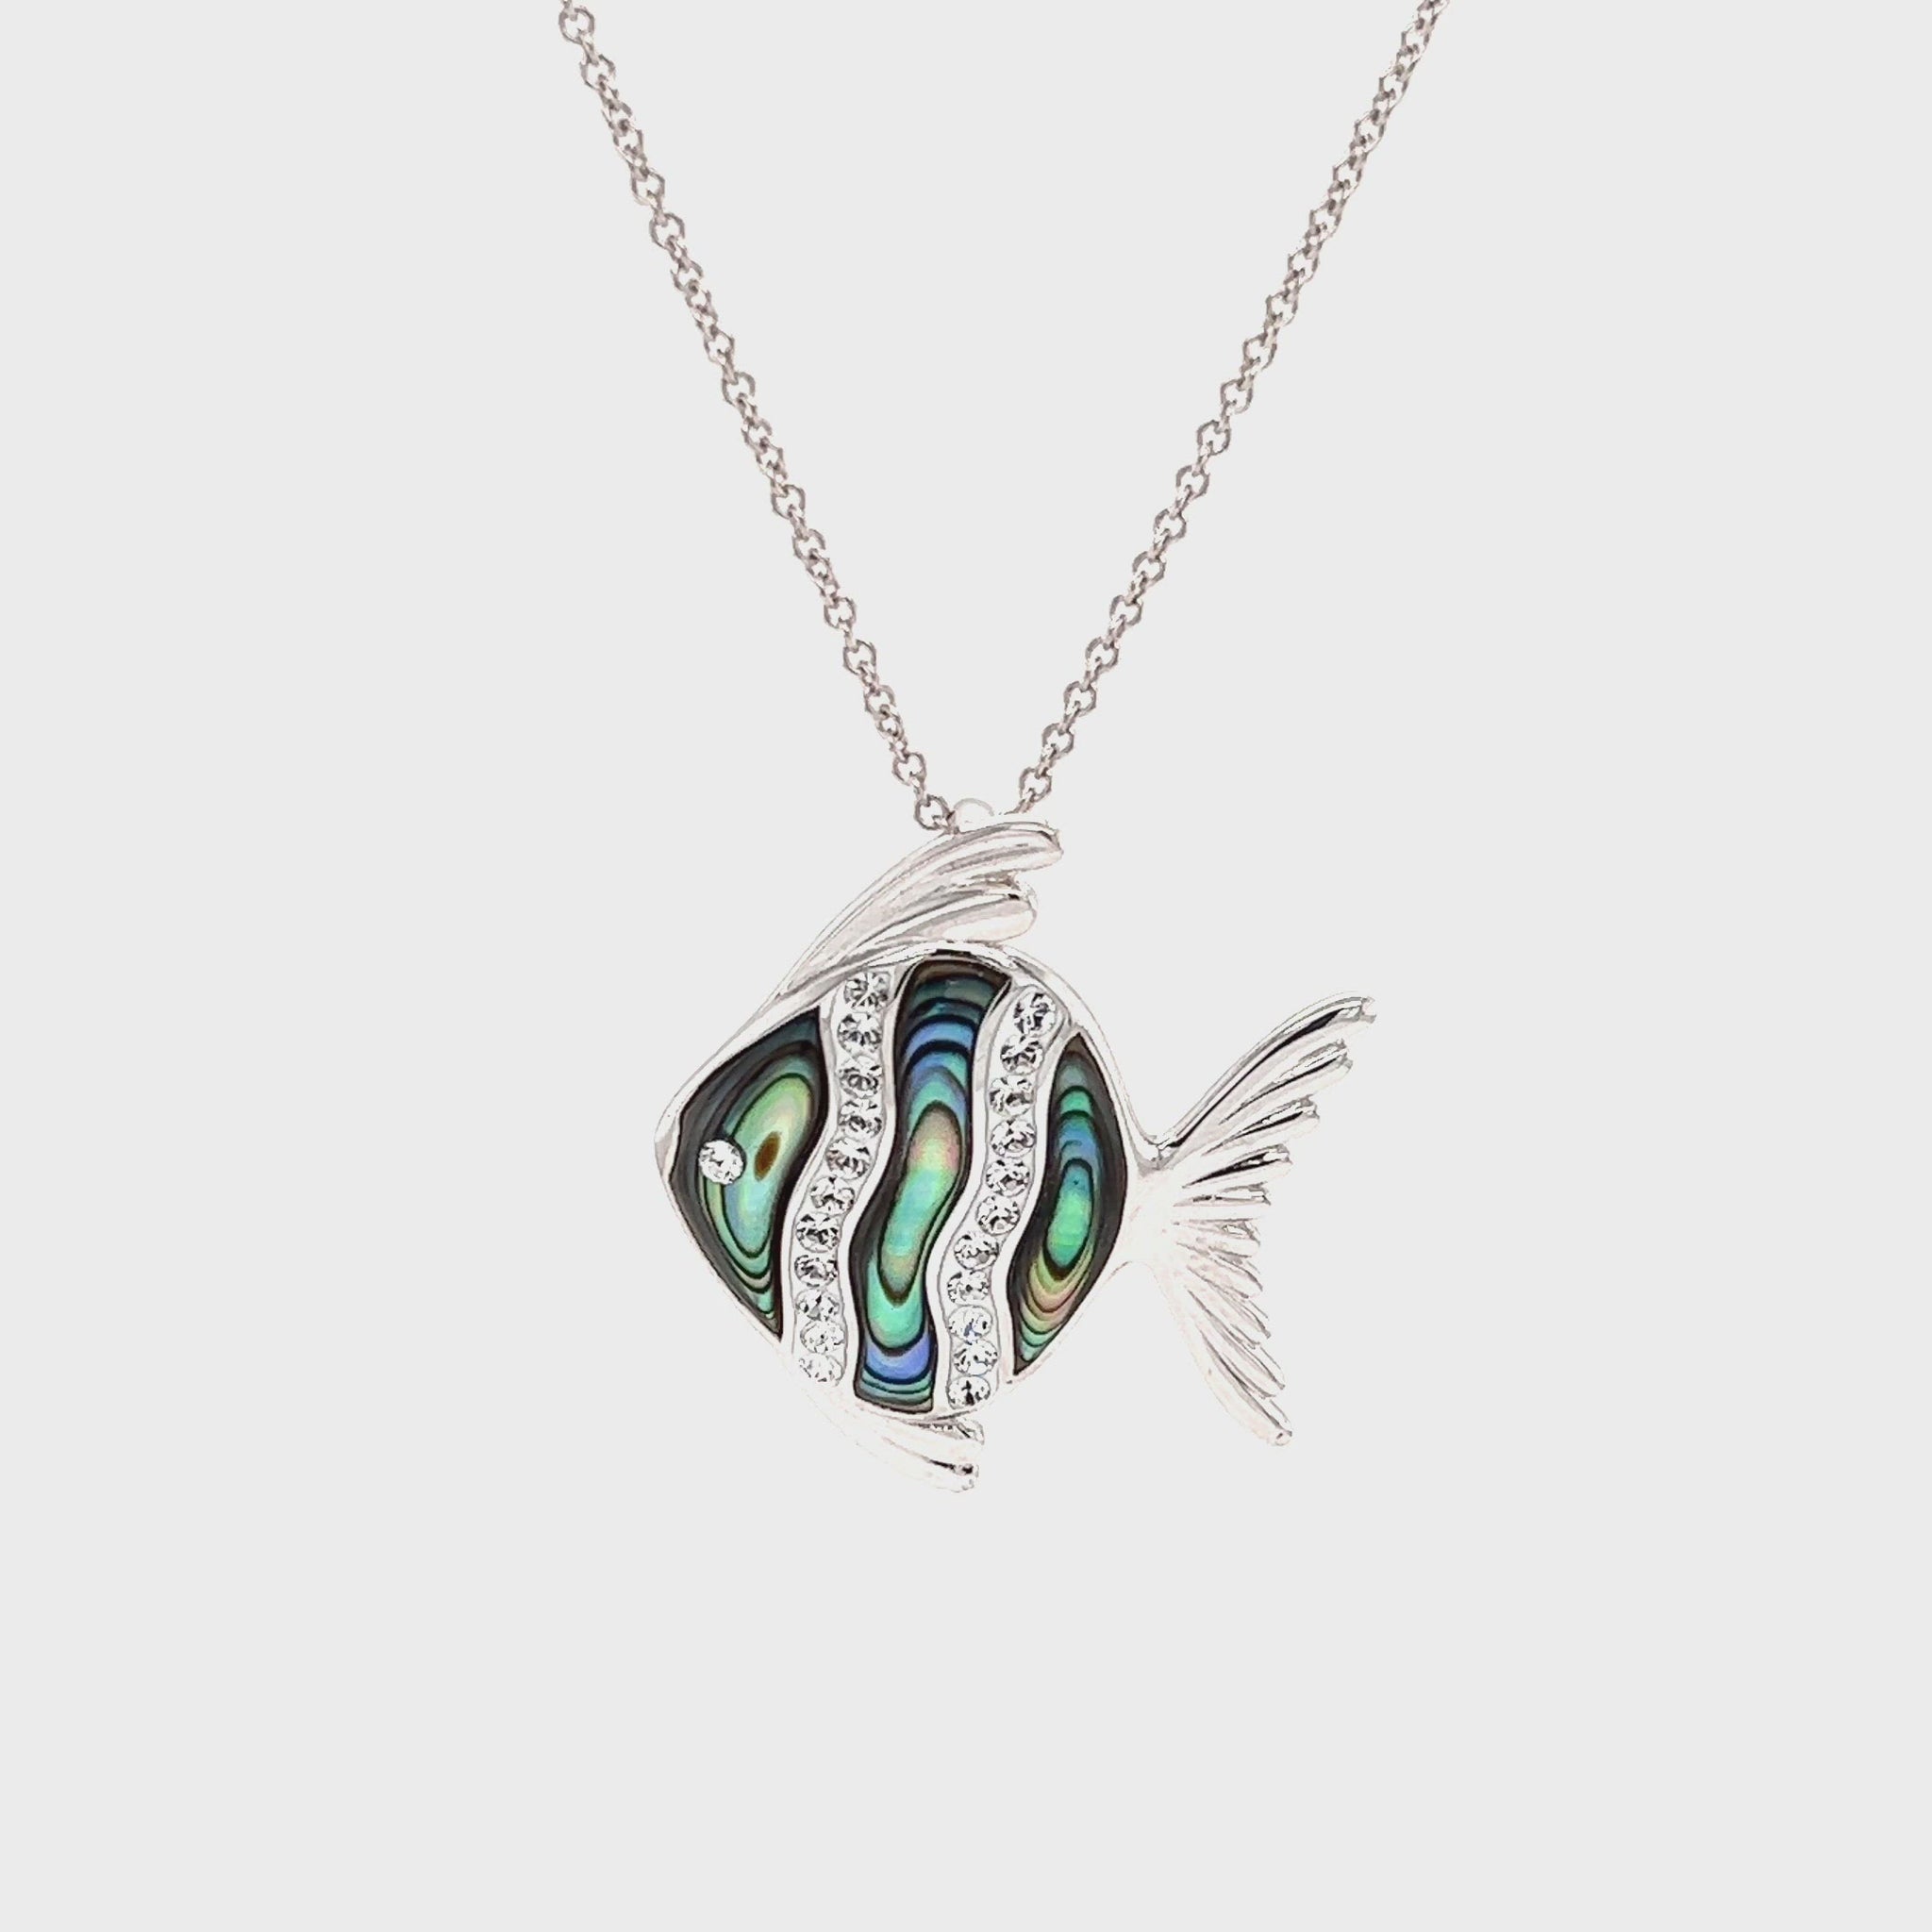 Abalone Shell Fish Necklace with White Crystals in Sterling SilverVideo